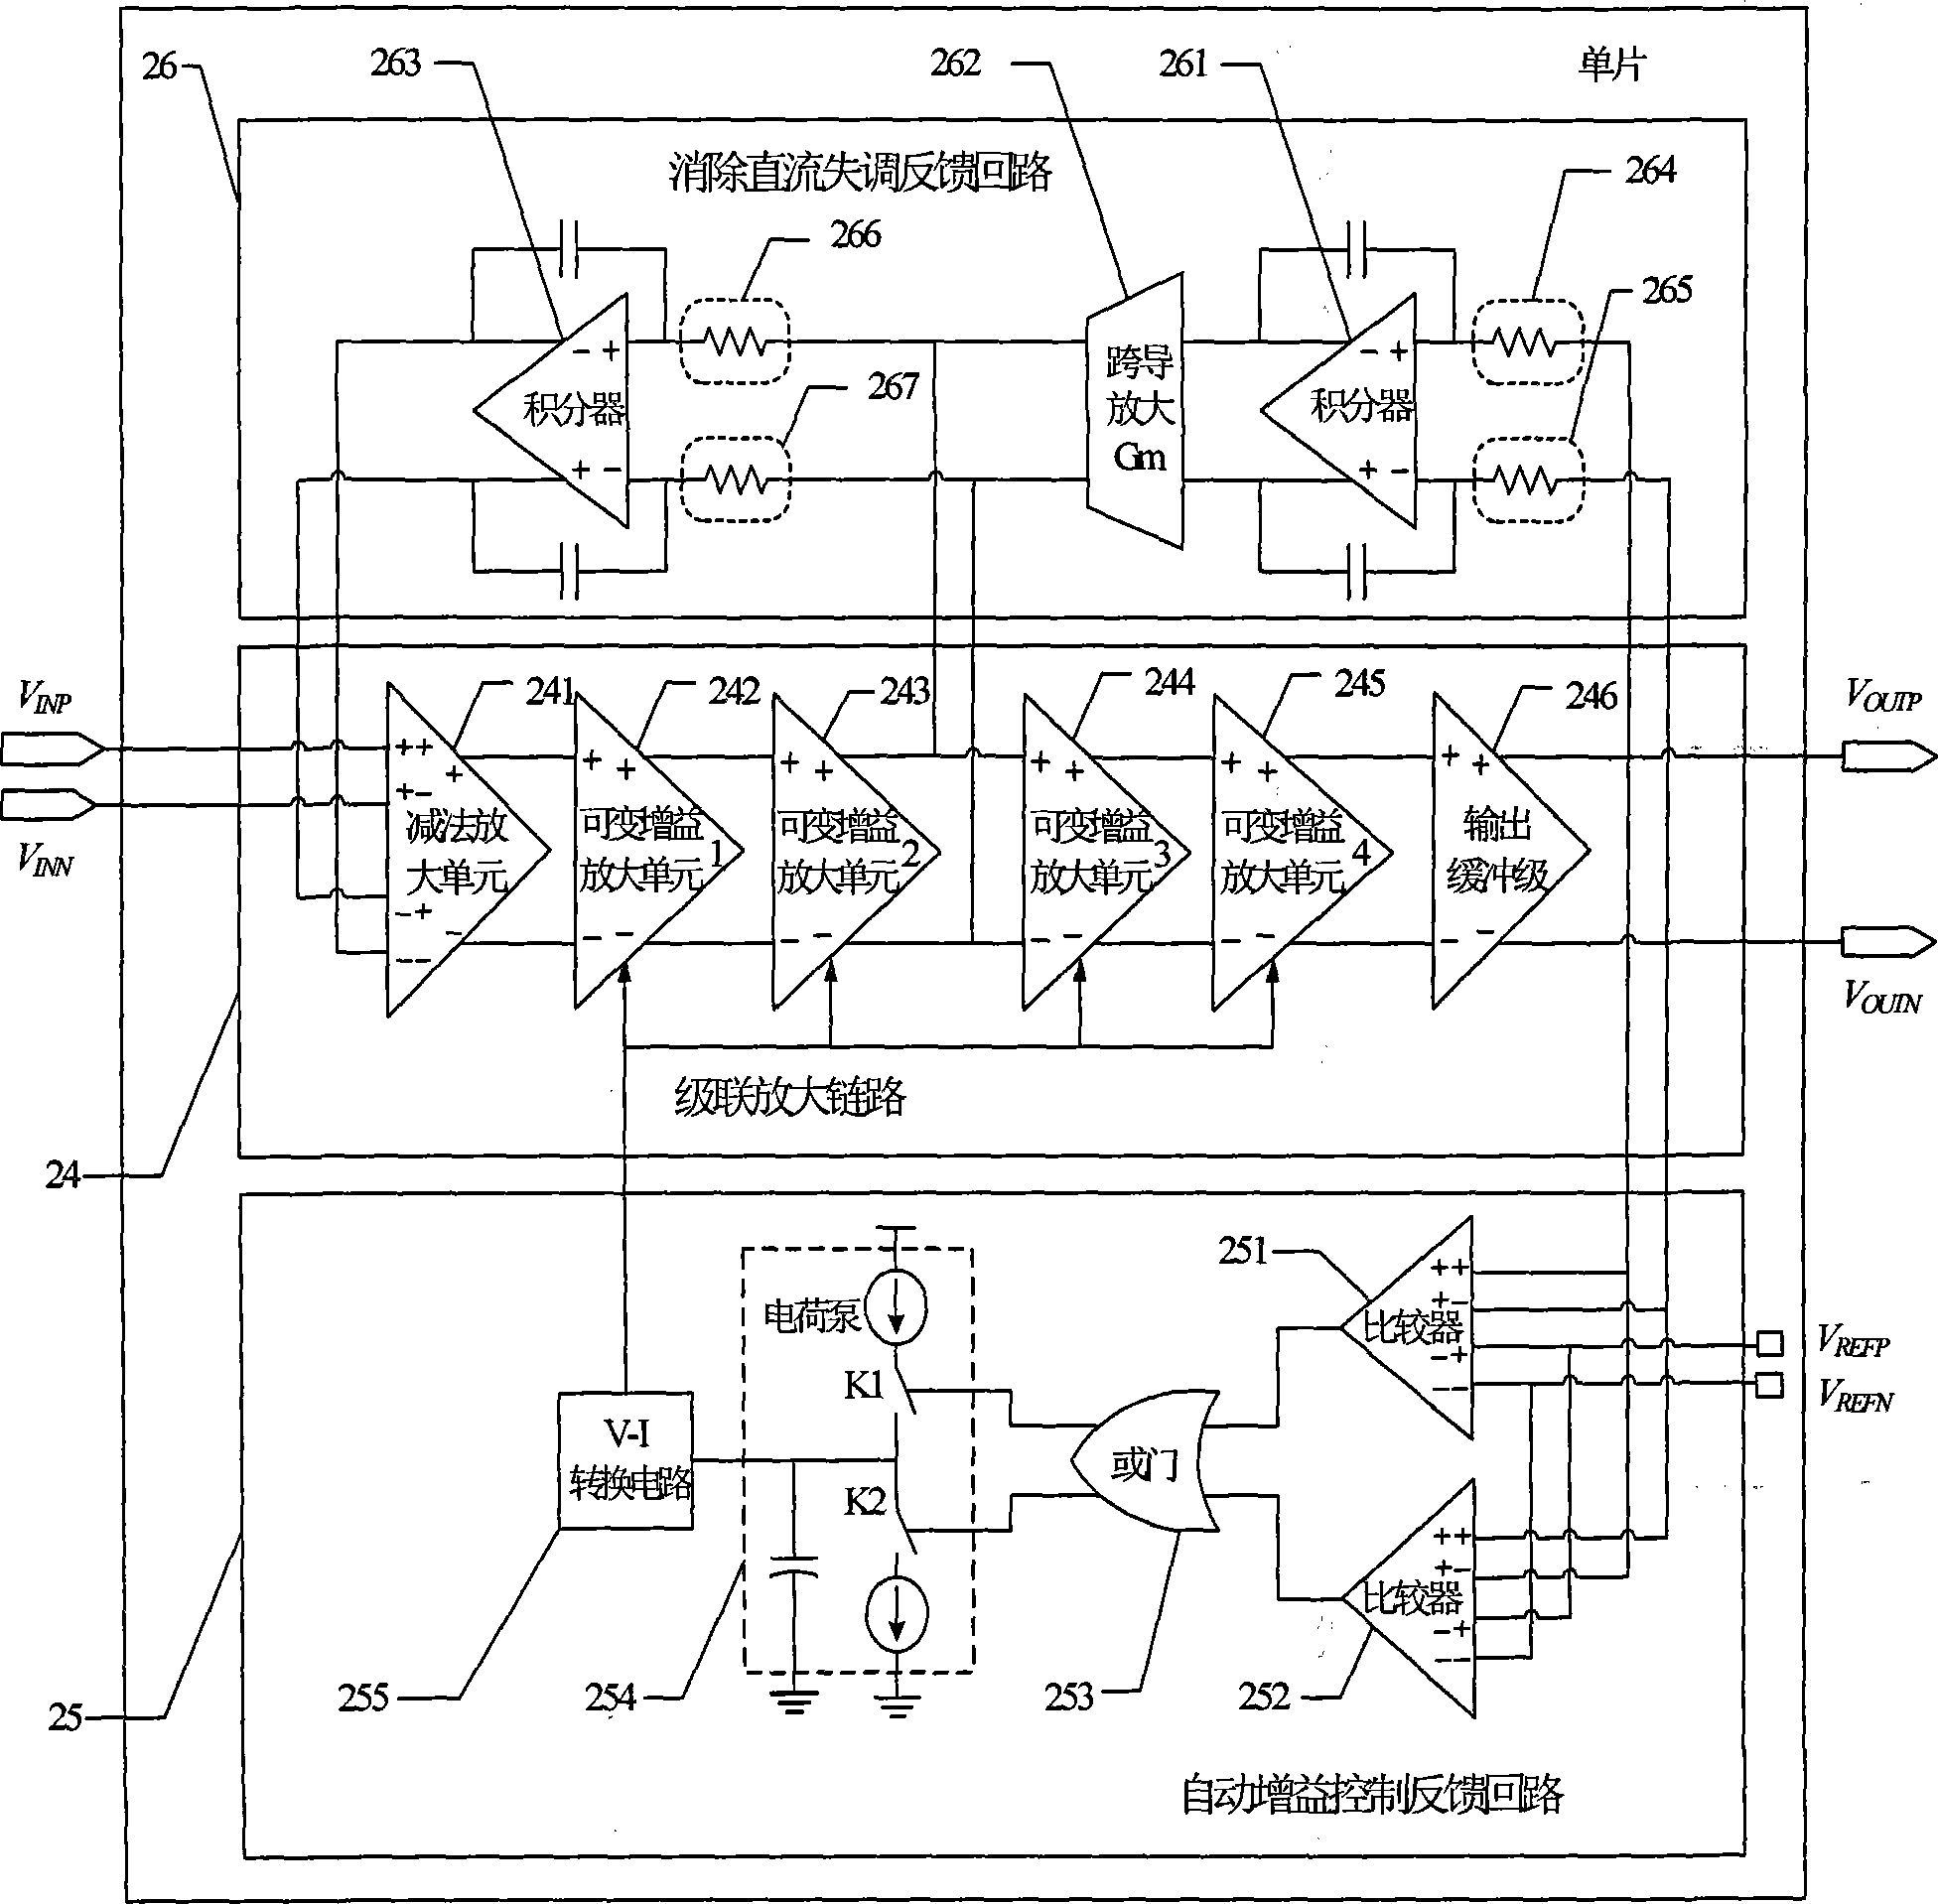 An Automatic Gain Control Amplifier for Eliminating DC Offset